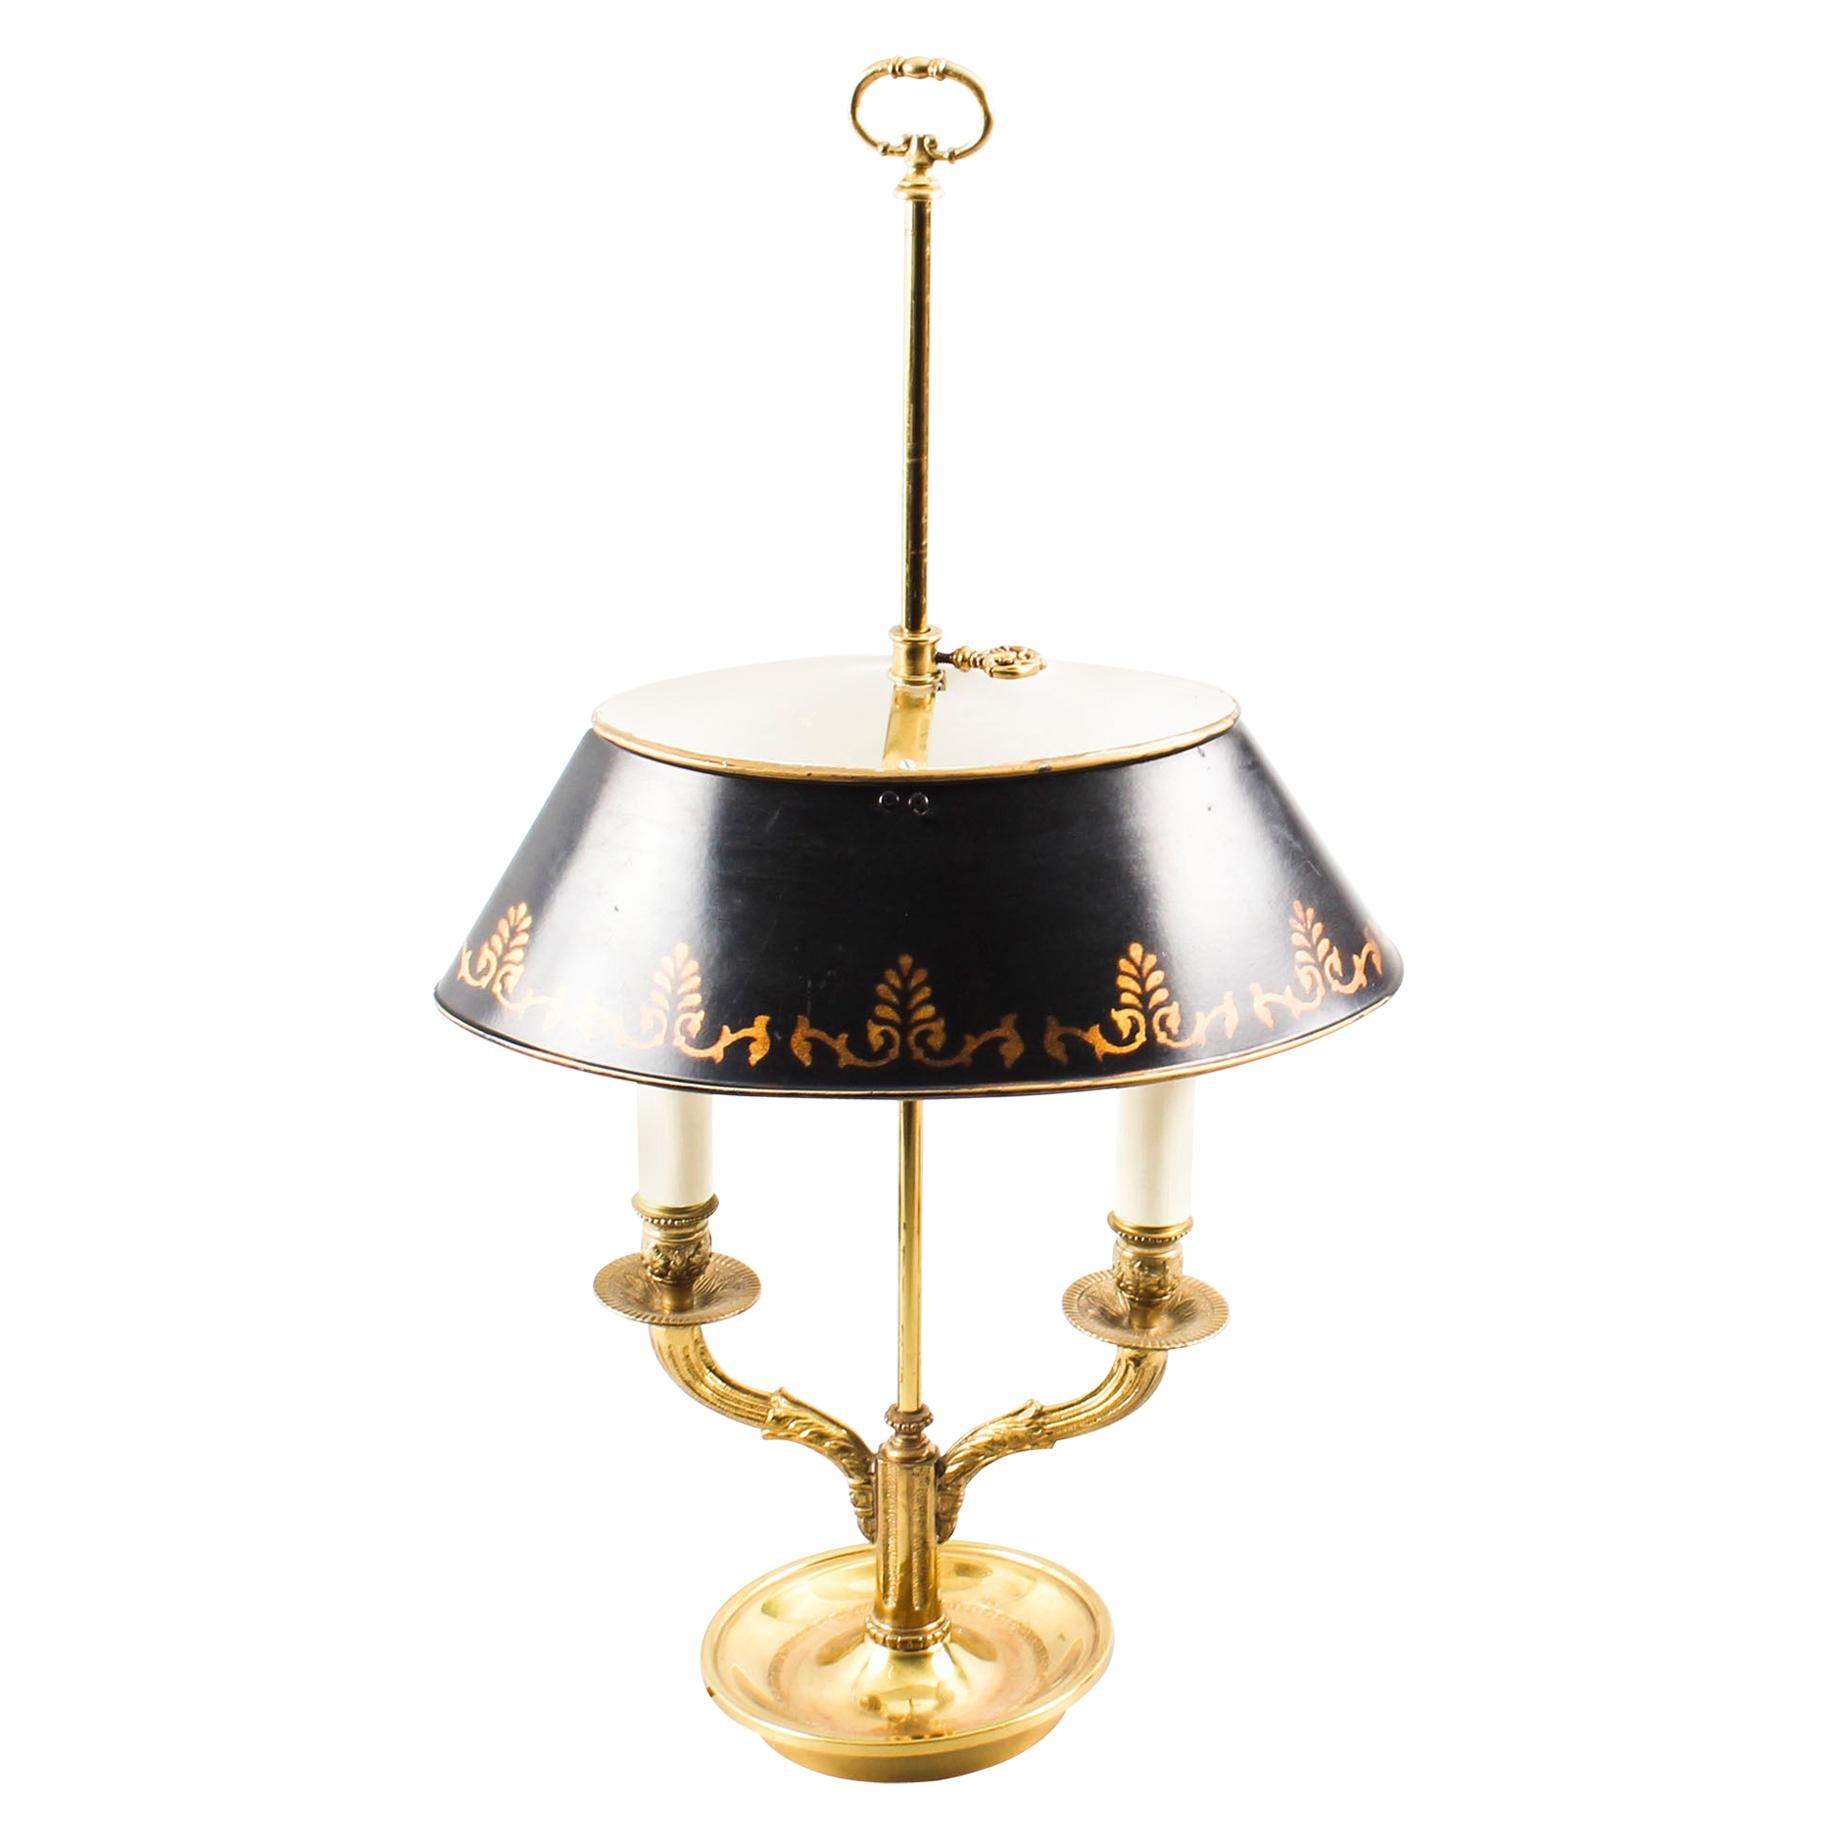 Vintage French Ormolu and Toleware Bouillotte Lamp, Midcentury